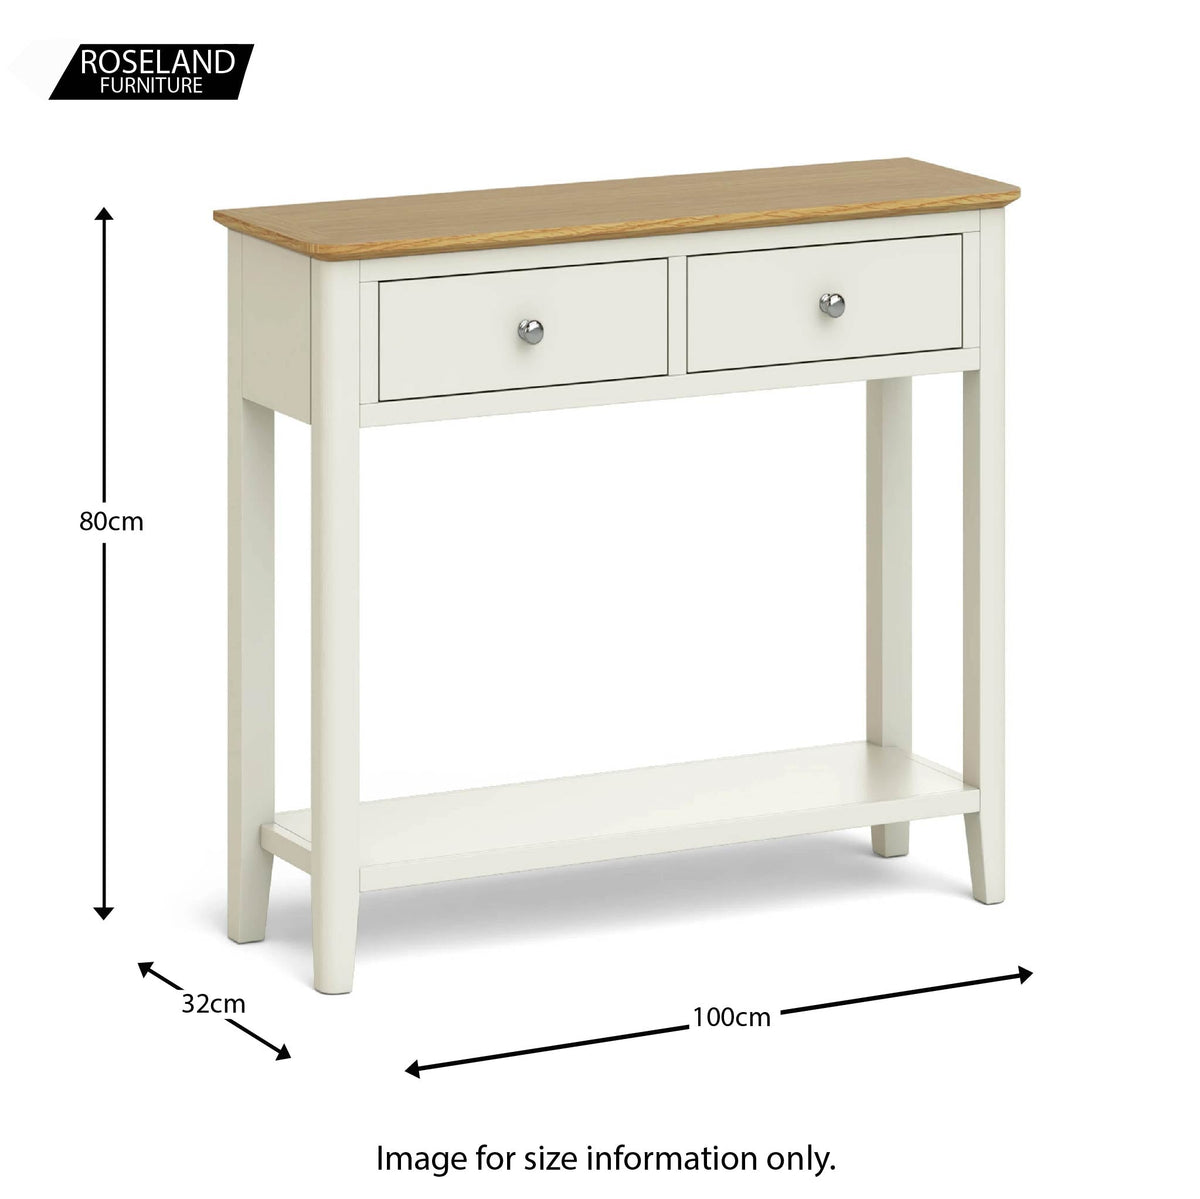 The Windsor Cream Painted Console Table size guide